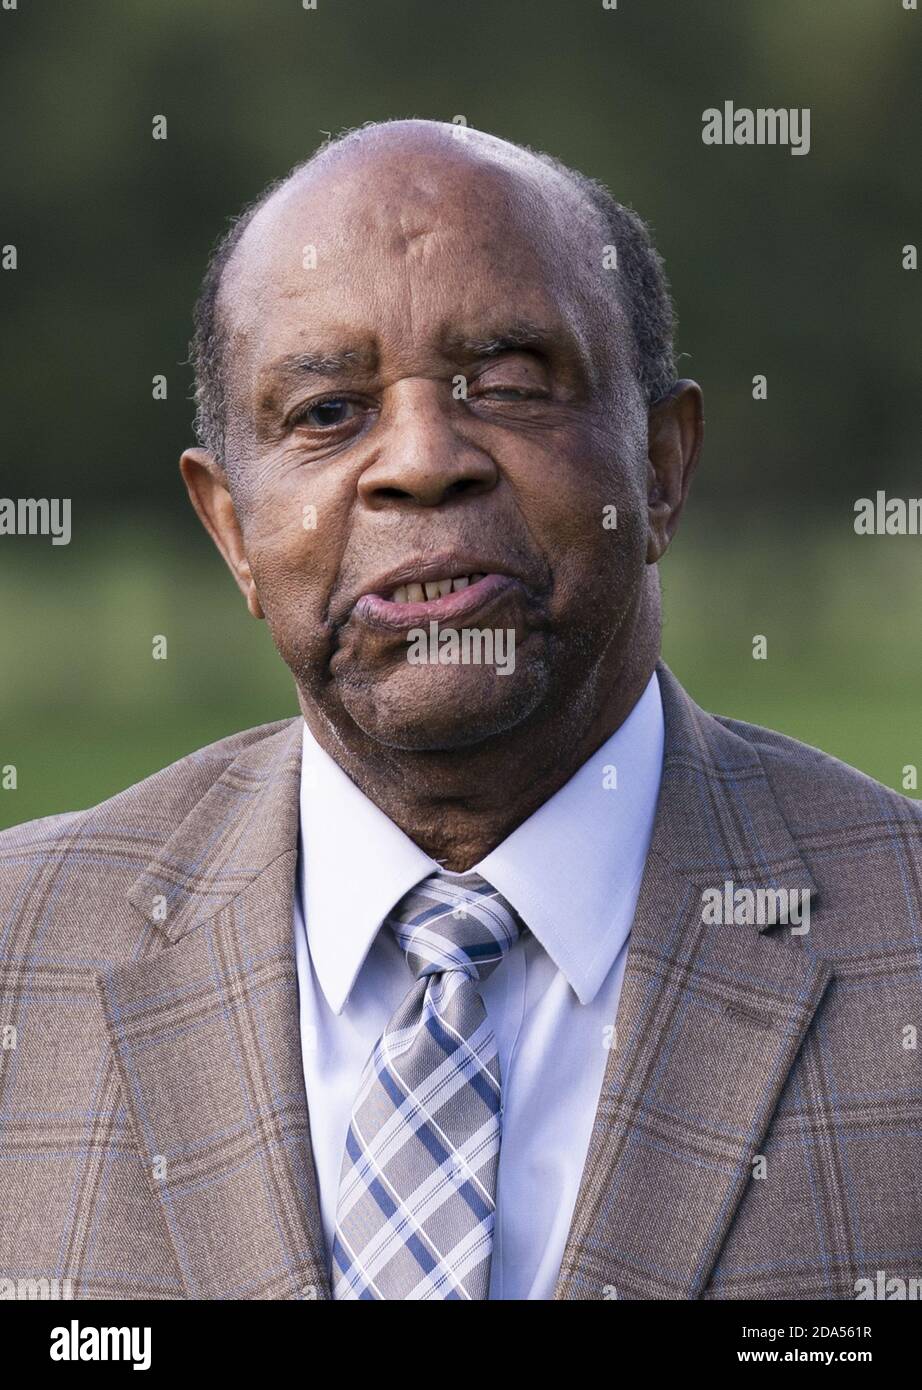 Lee Elder, the first black man to compete in the Masters Torment, poses for a photo after it was announced that Augusta National will establishing scholarships in his name, before the start of the 2020 Masters golf tournament at the Augusta National Golf Club in Augusta, George on Monday, November 9, 2020. Augusta National announced today the creation of the Lee Elder Scholarships at Paine College, a Historically Black College and University, awarded to a male and female student athlete on the college's golf team. Photo by Kevin Dietsch/UPI Stock Photo